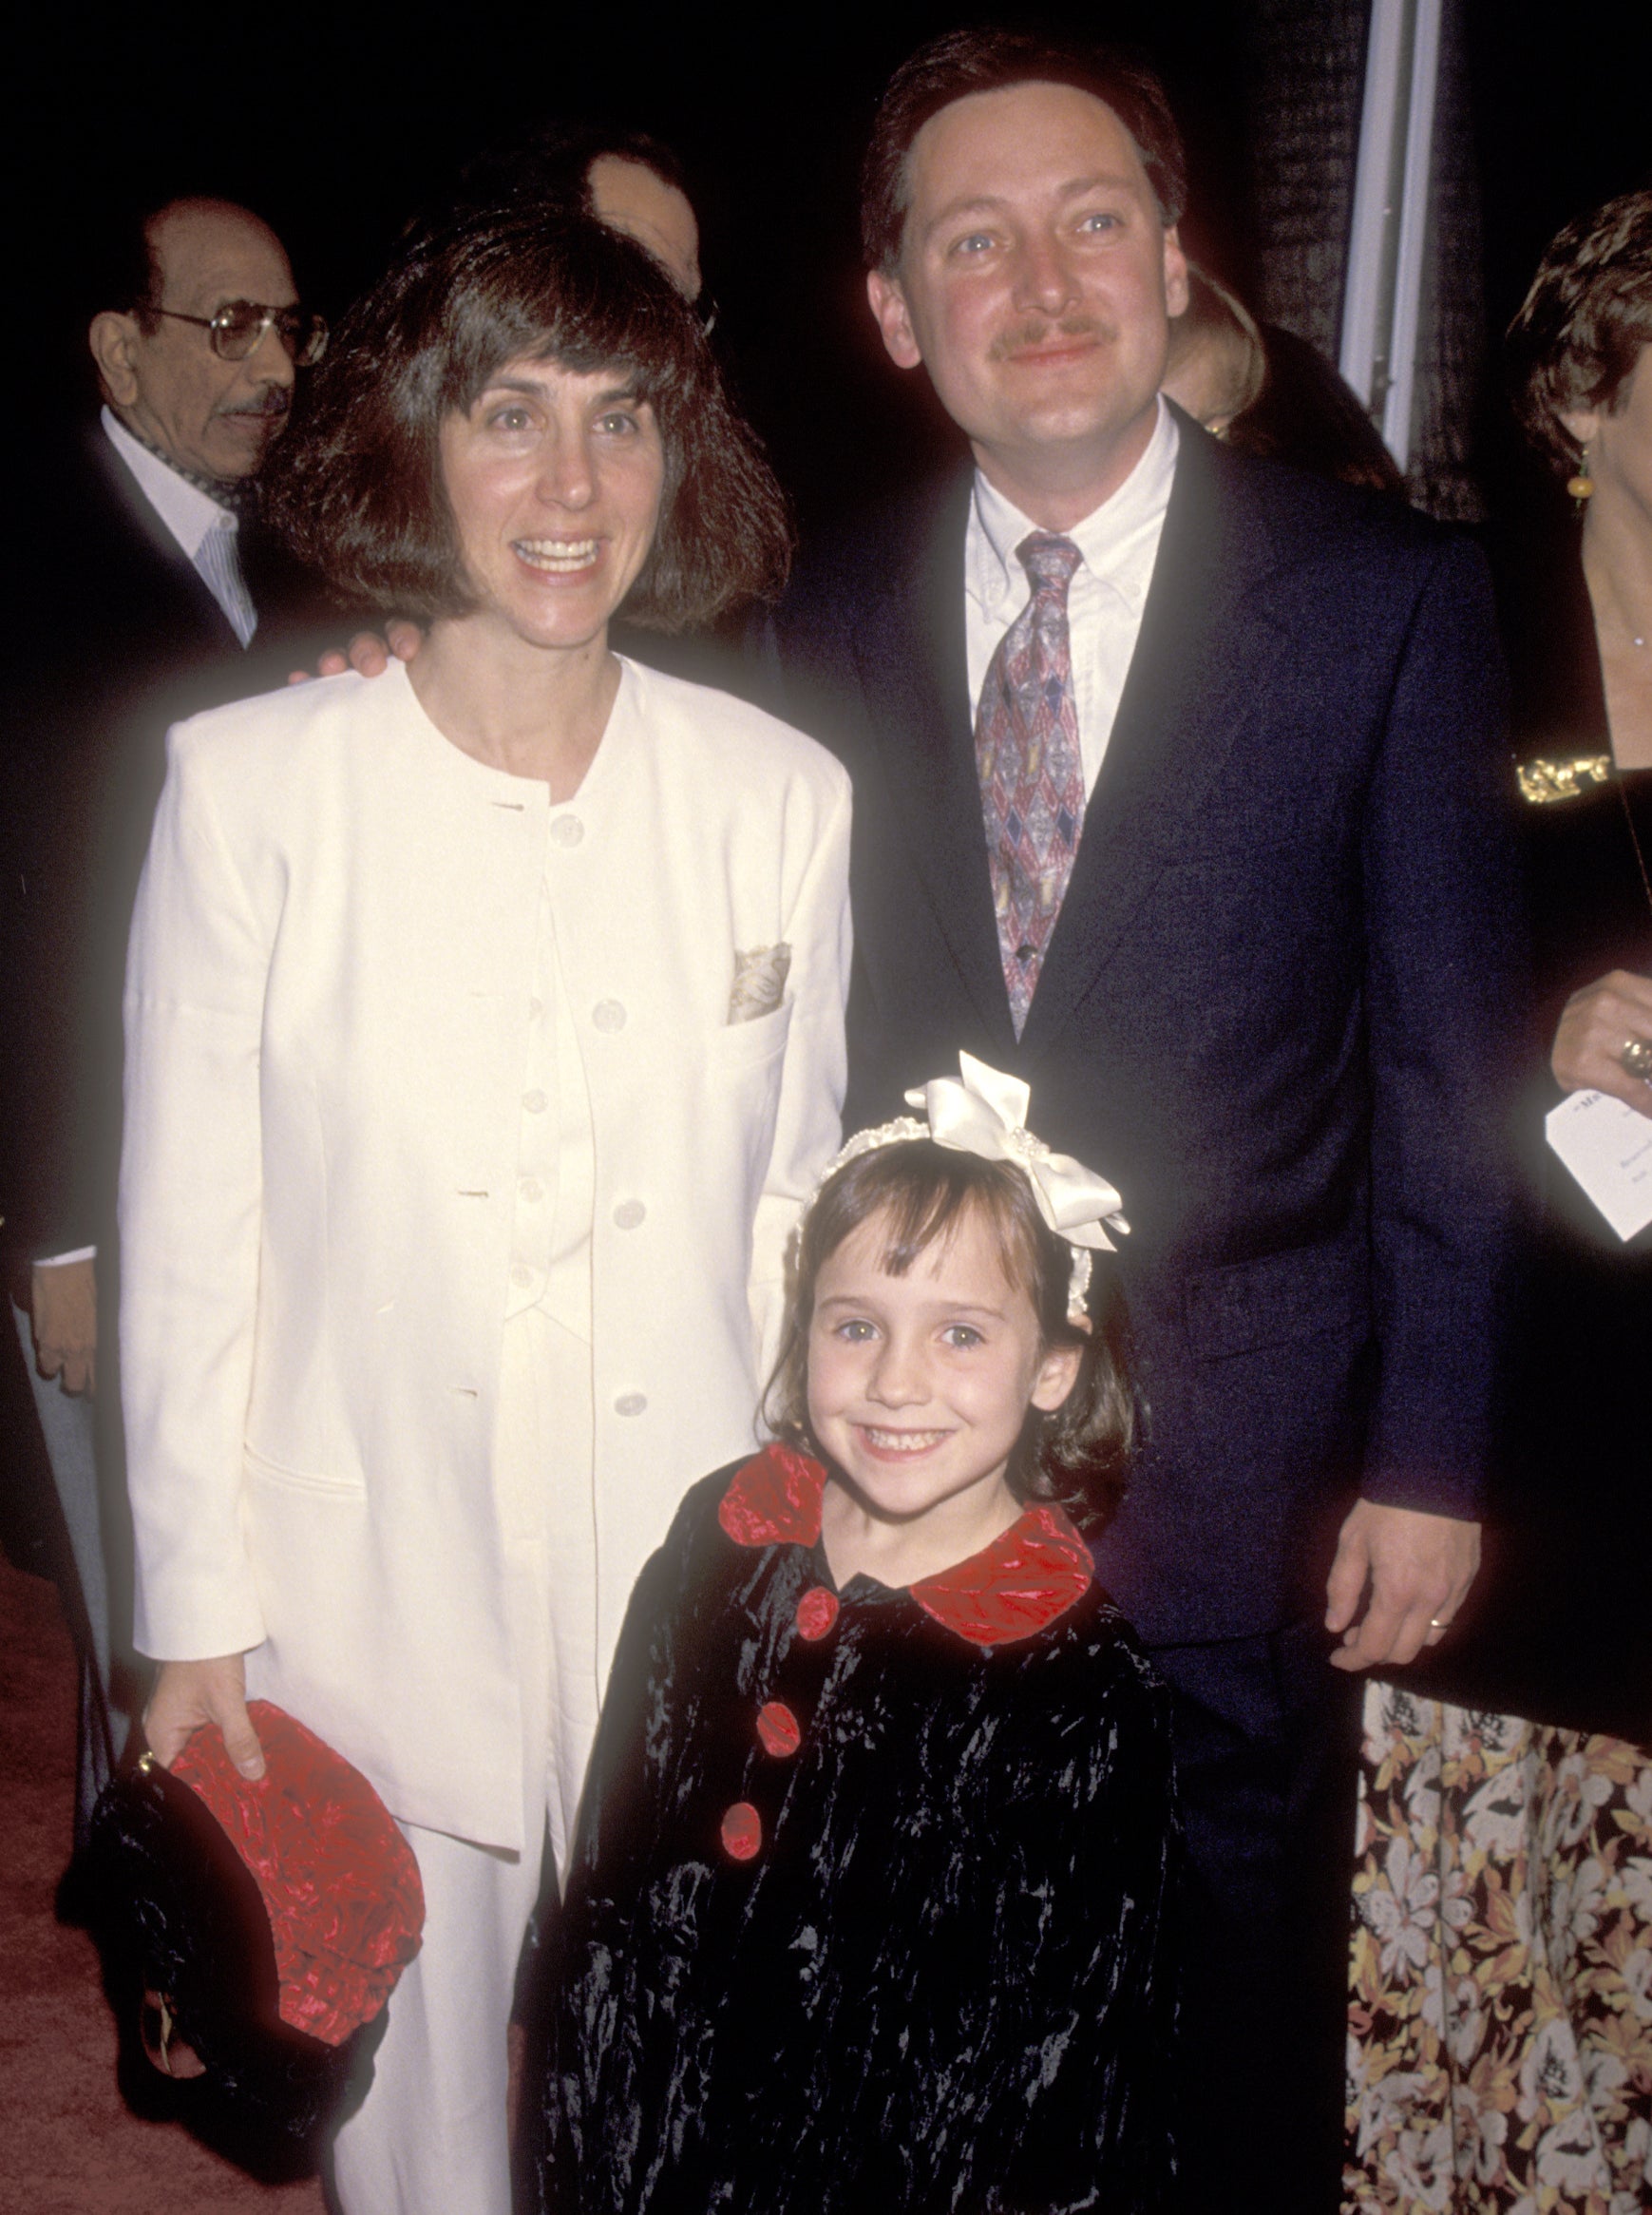 Mara with her parents, Suzie and Michael Wilson